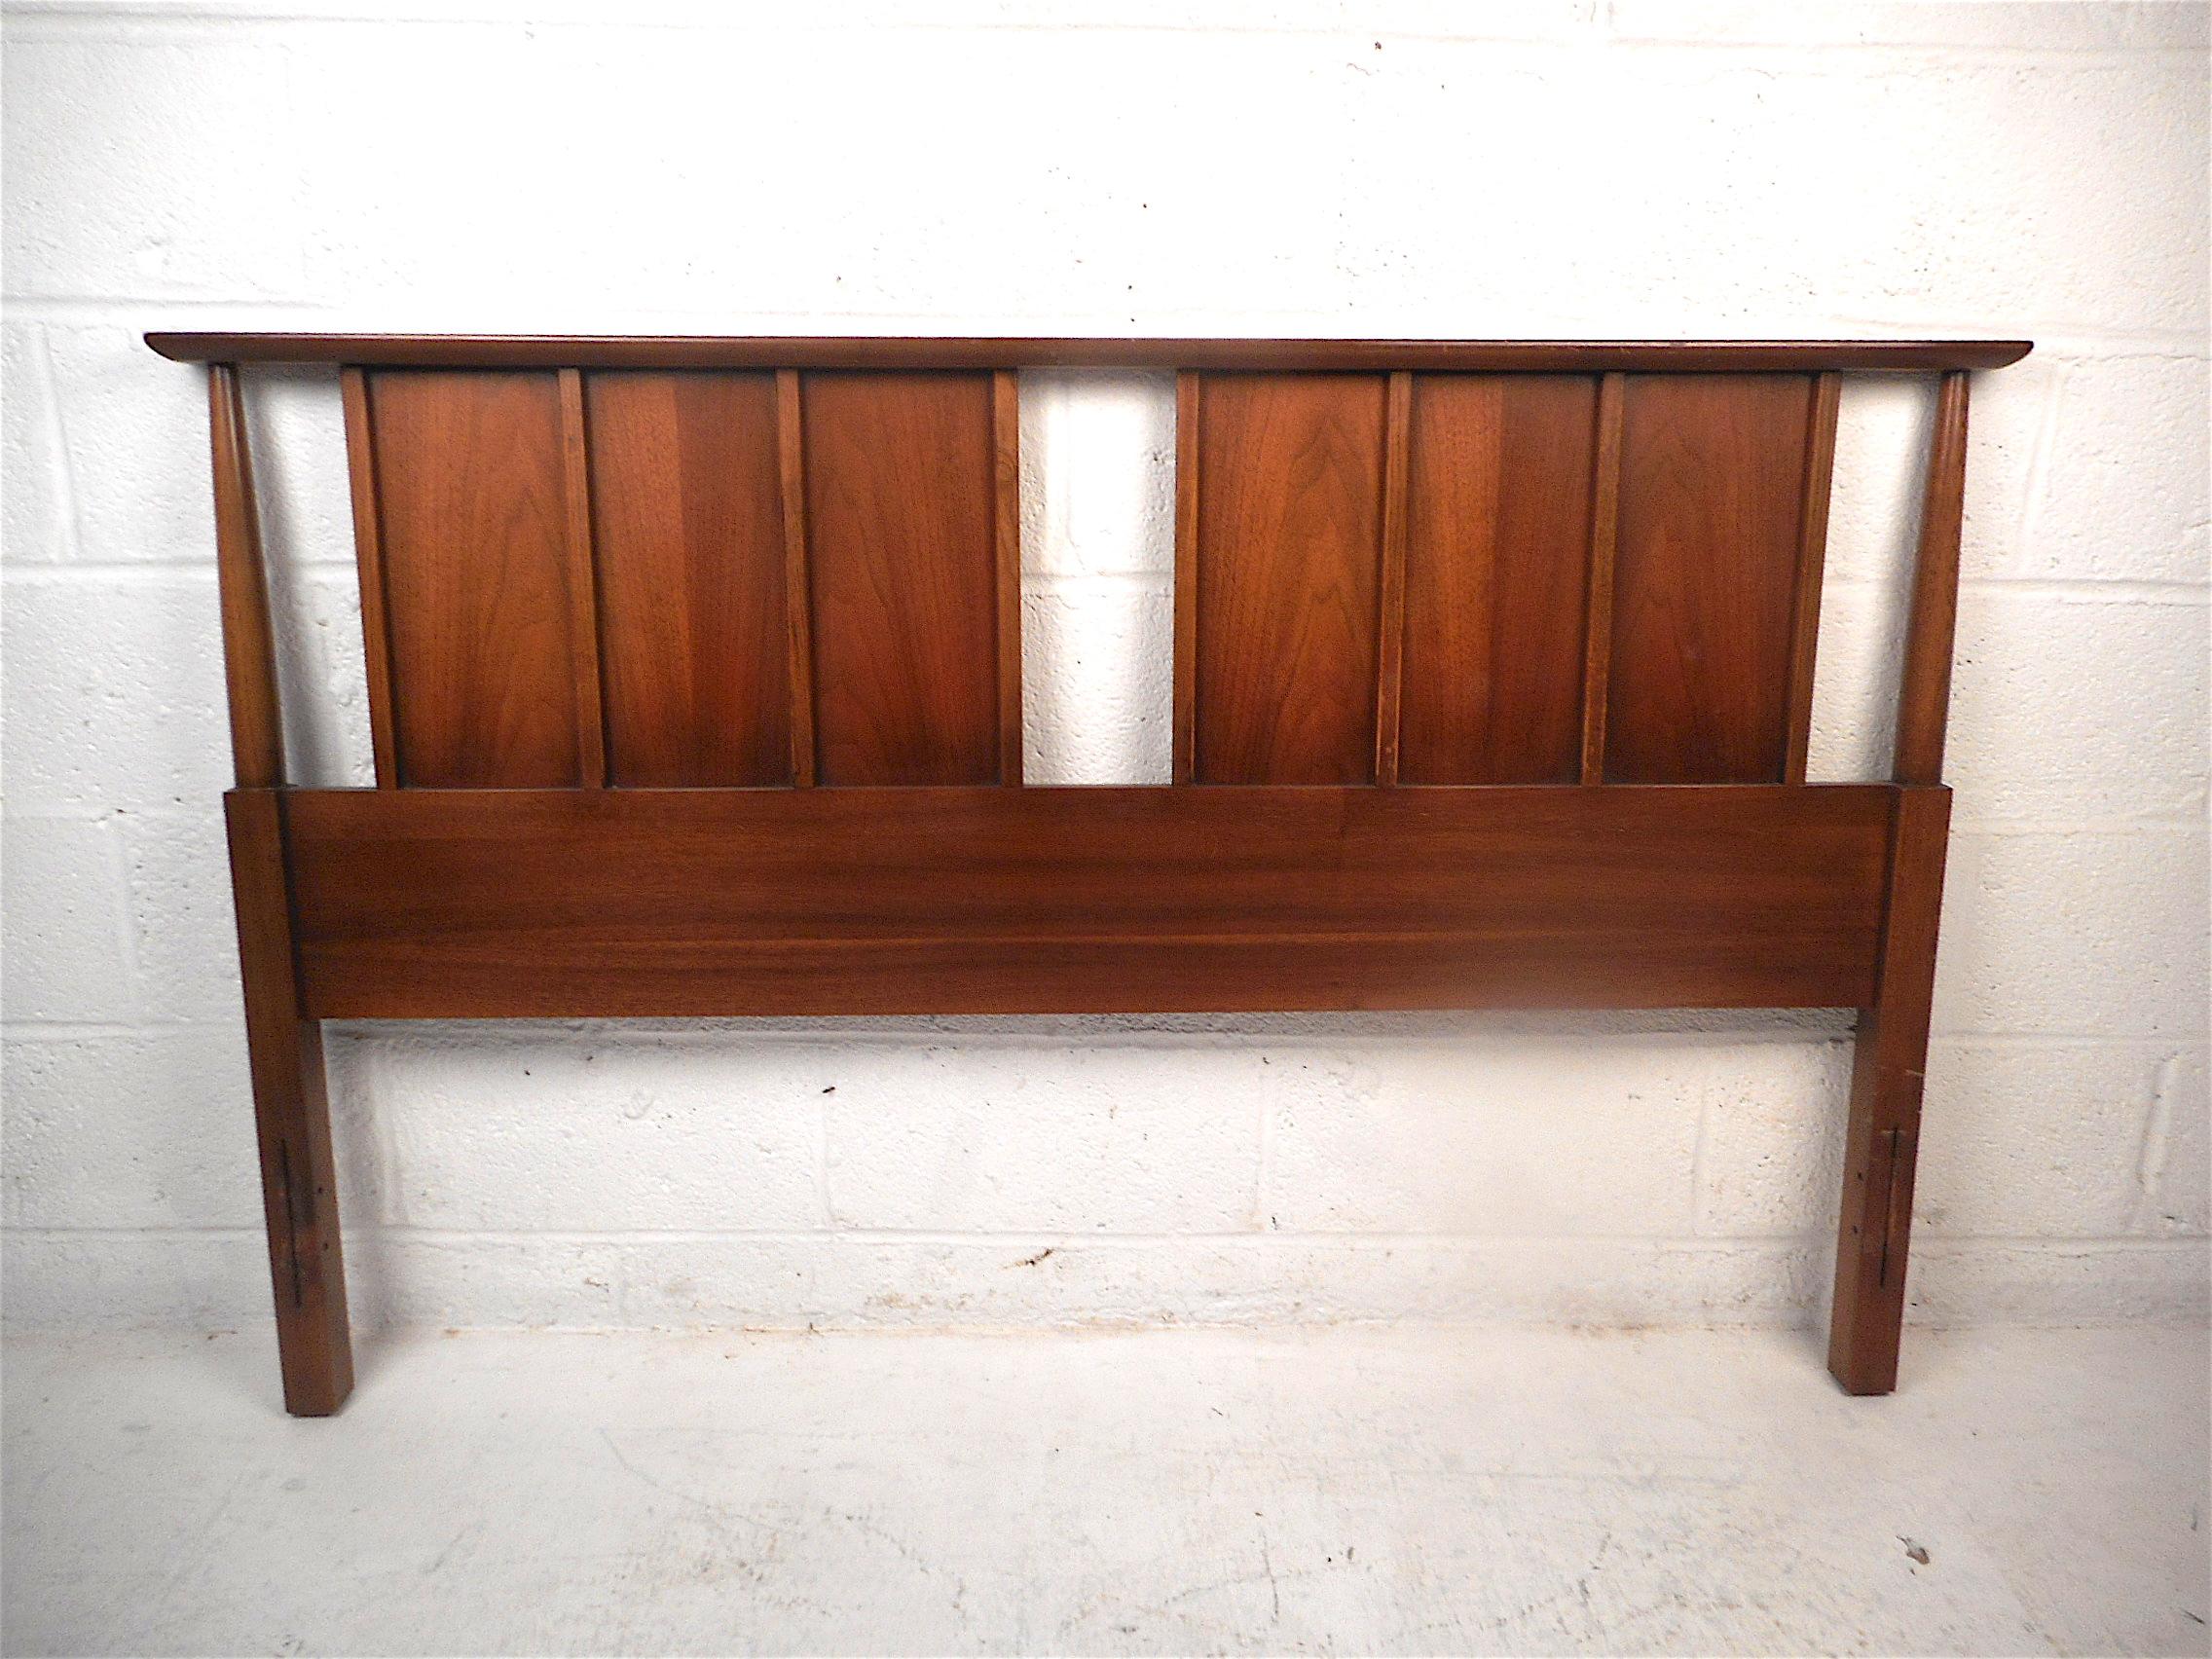 Stylish midcentury headboard and footboard. Sturdy construction with a dark walnut finish. Stylish tapered supports and vertical accents on the headboard. Great set sure to be a great addition to any modern interior. Rails not included. Made for a